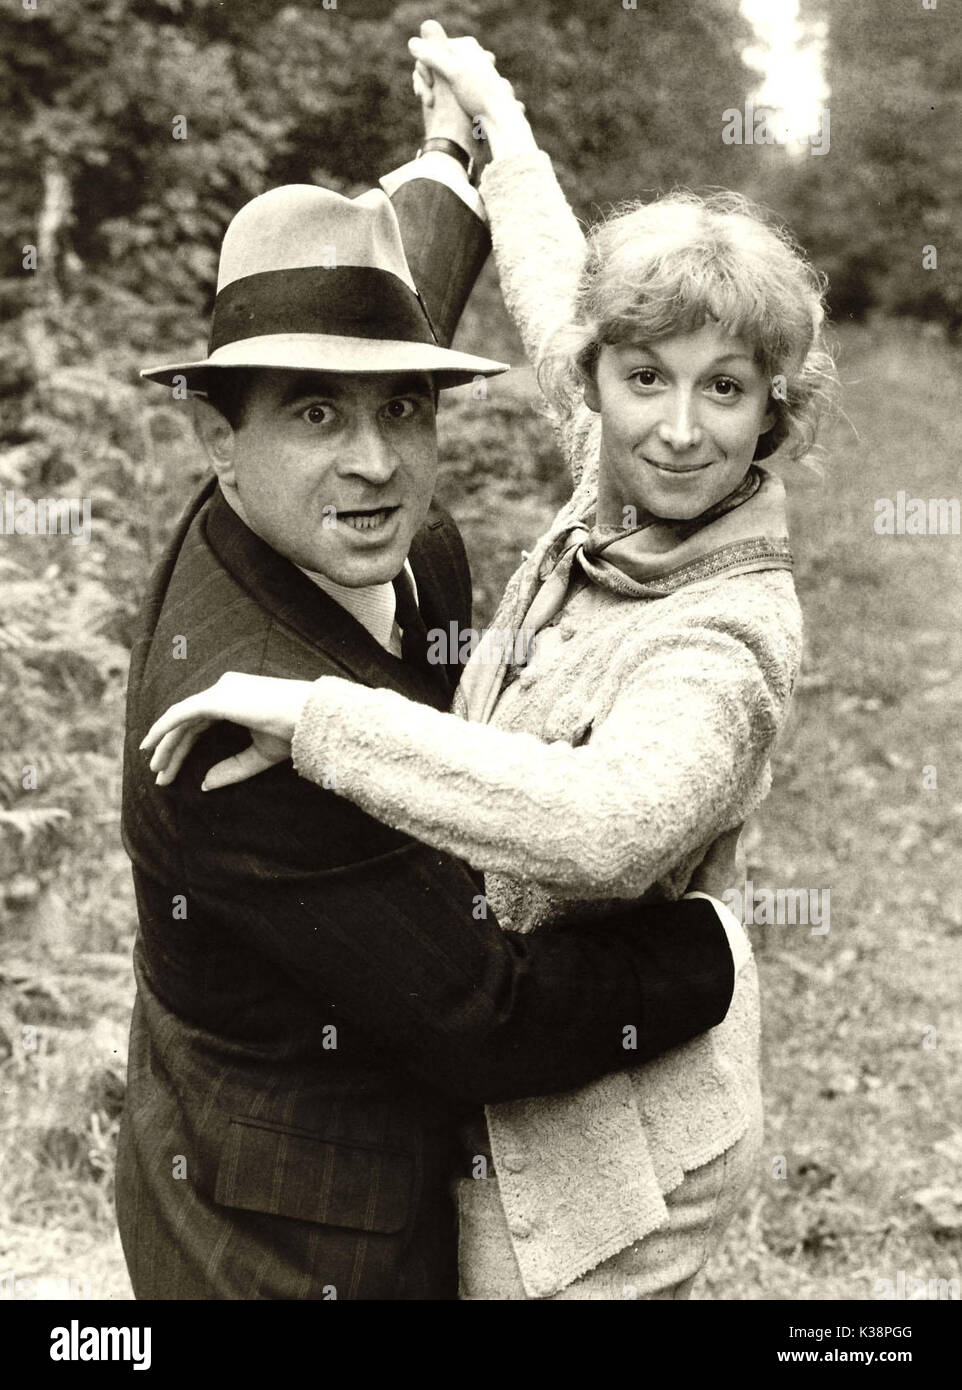 PENNIES FROM HEAVEN: Part Two of six, The Sweetest Thing Bob Hoskins and Cheryl Campbell PENNIES FROM HEAVEN Part two of six: The Sweetest Thing BOB HOSKINS, CHERYL CAMPBELL     Date: 1968 Stock Photo